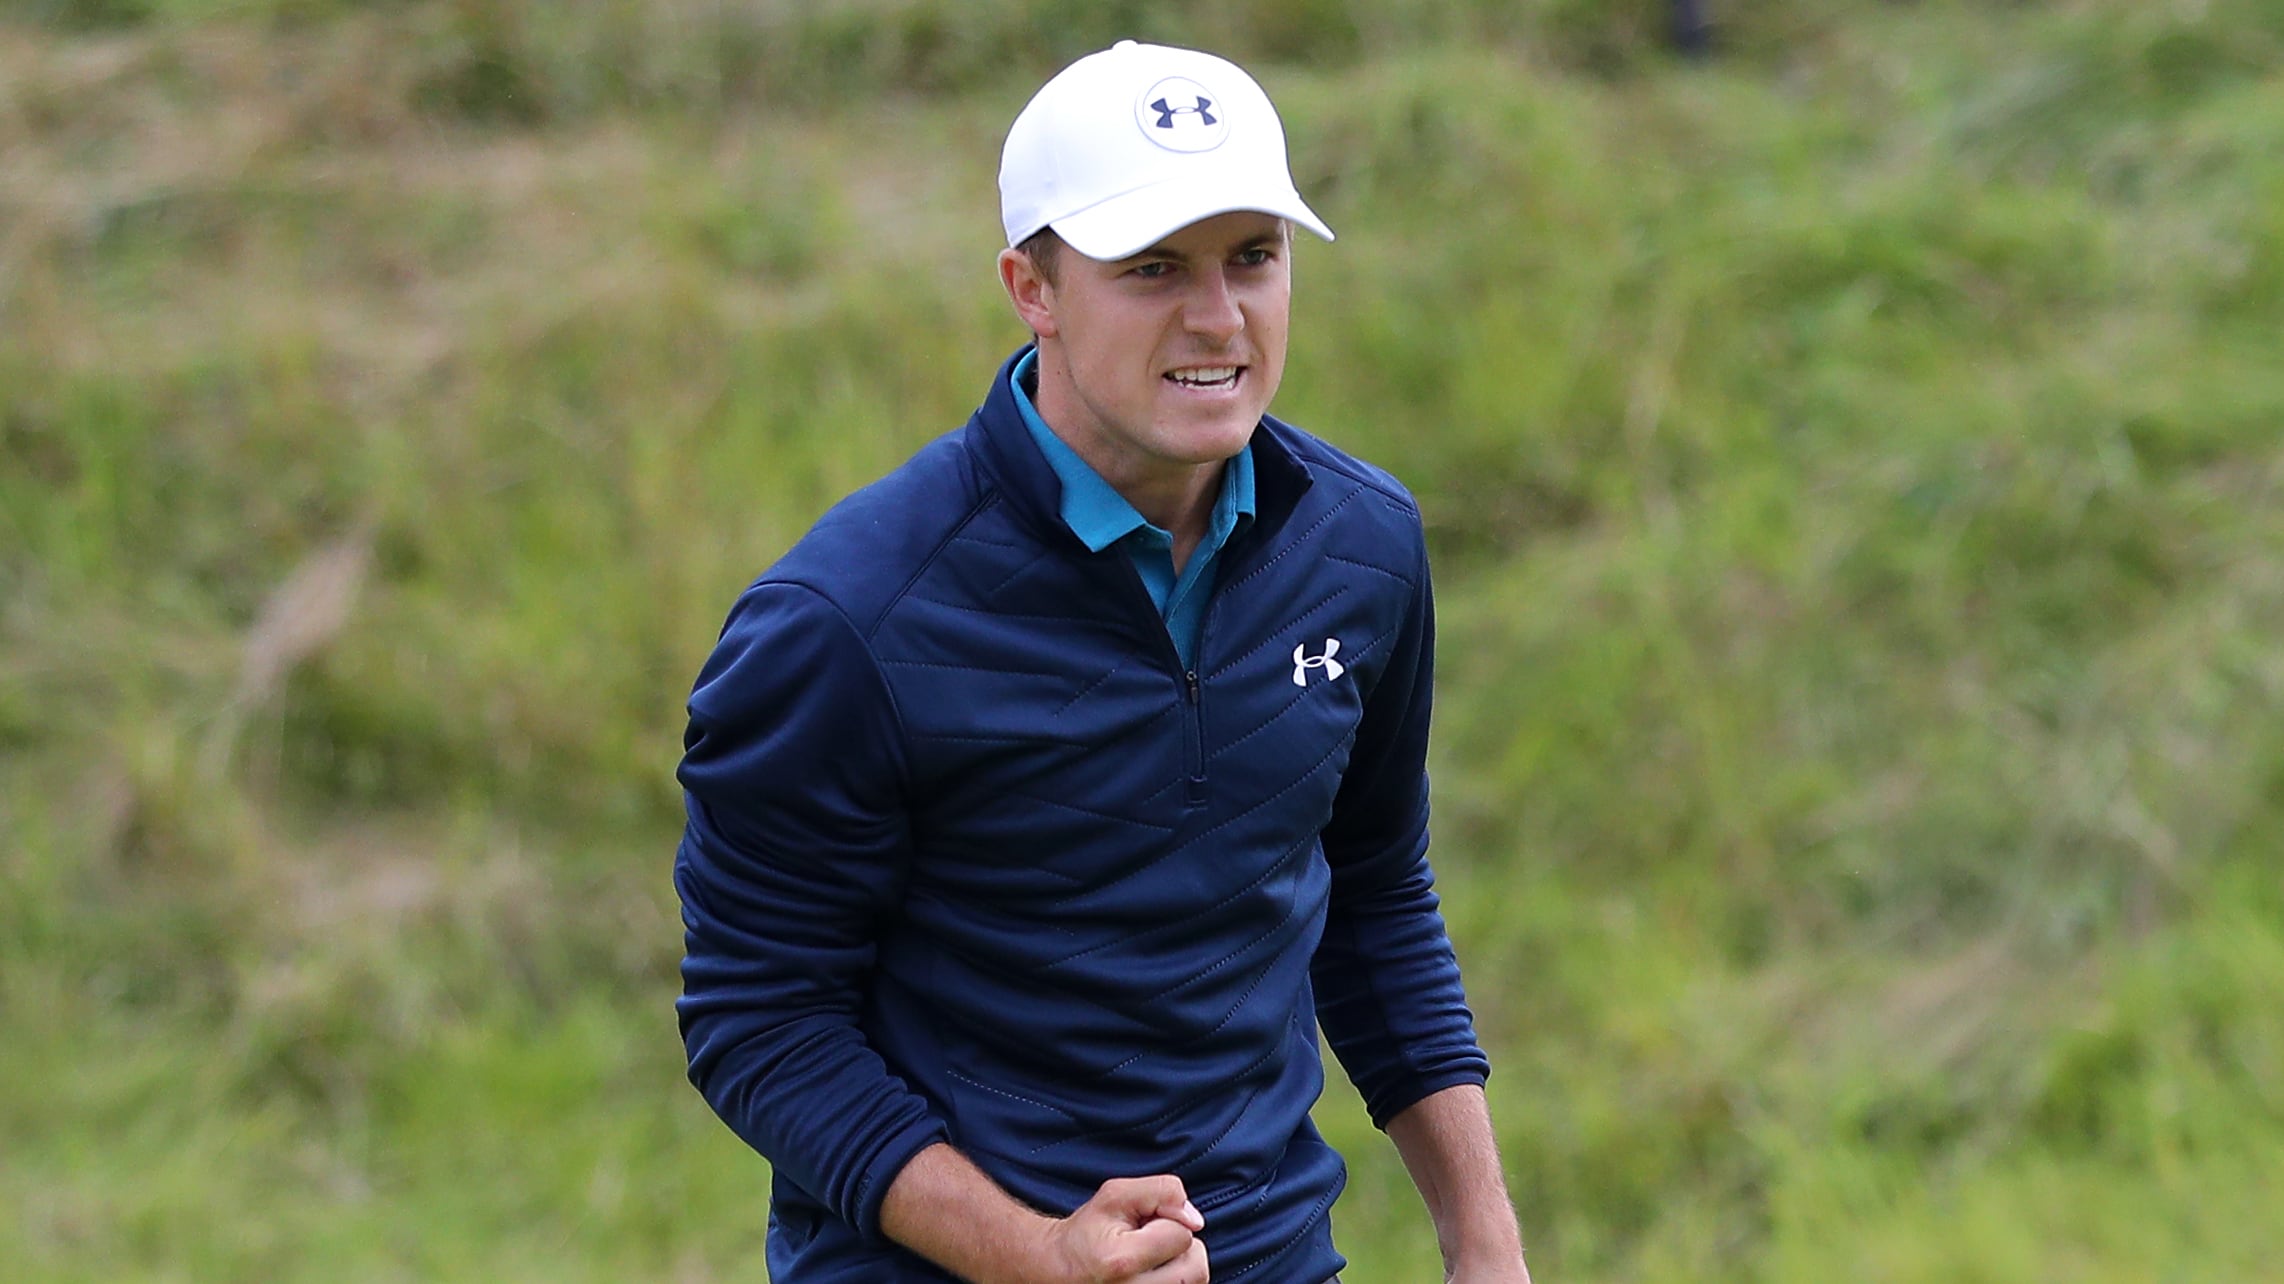 Jordan Spieth became just the sixth man to win the Masters and US Open in the same year